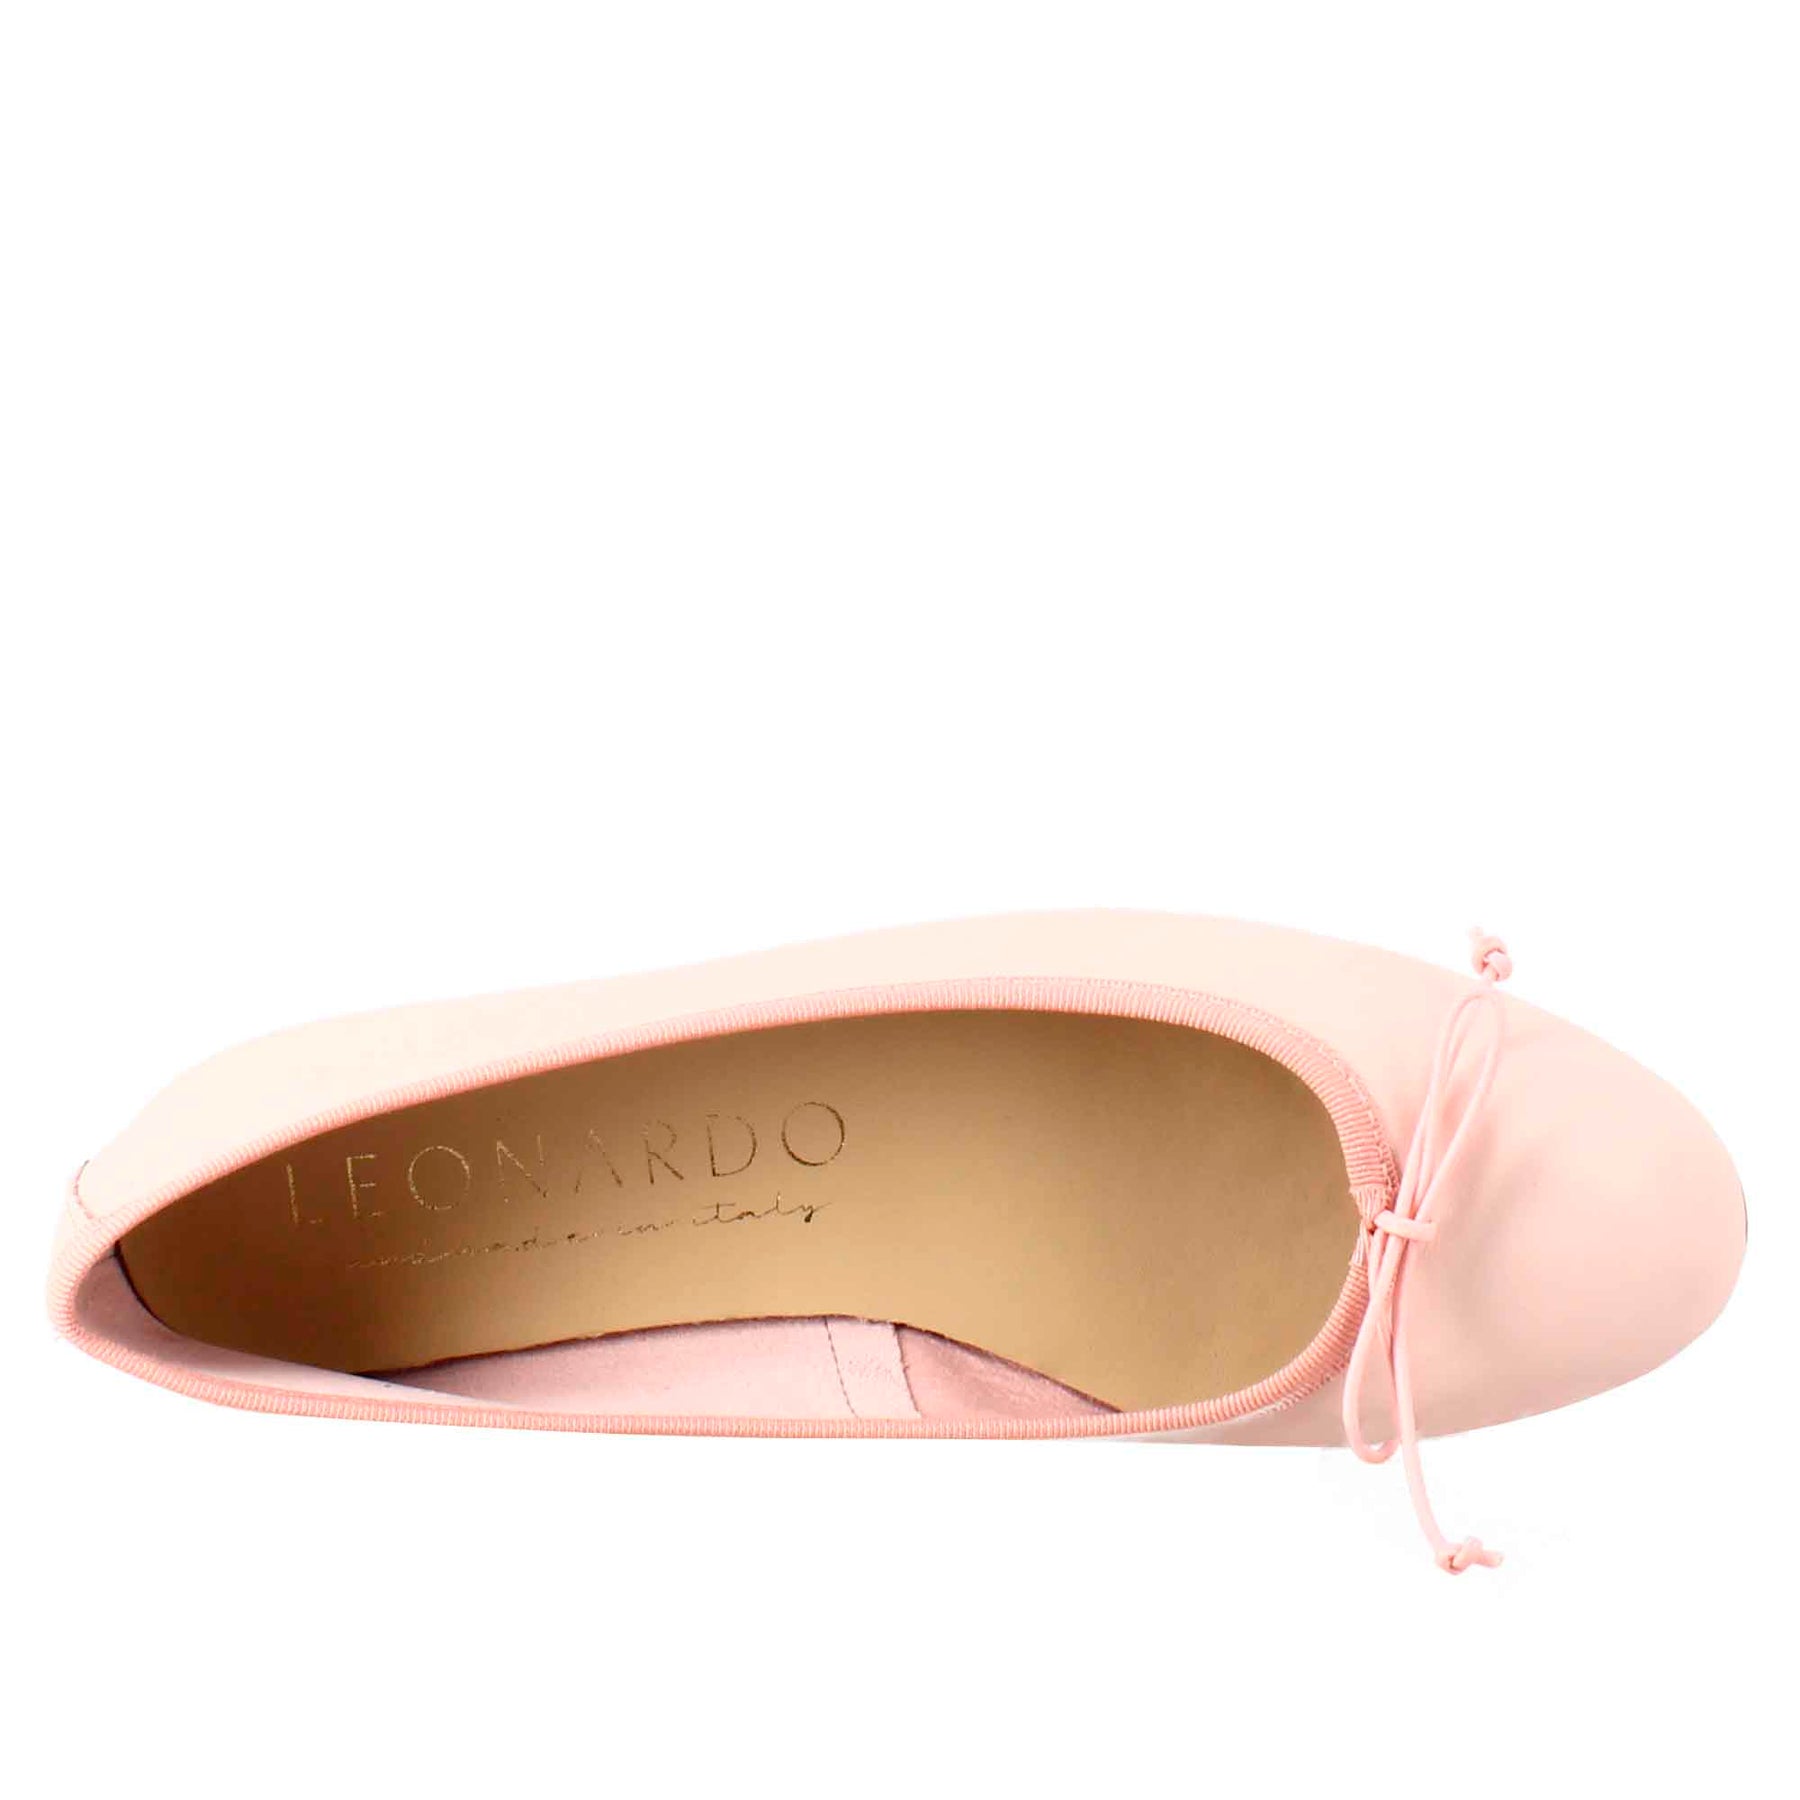 Light women's powder-colored ballet flats in smooth leather